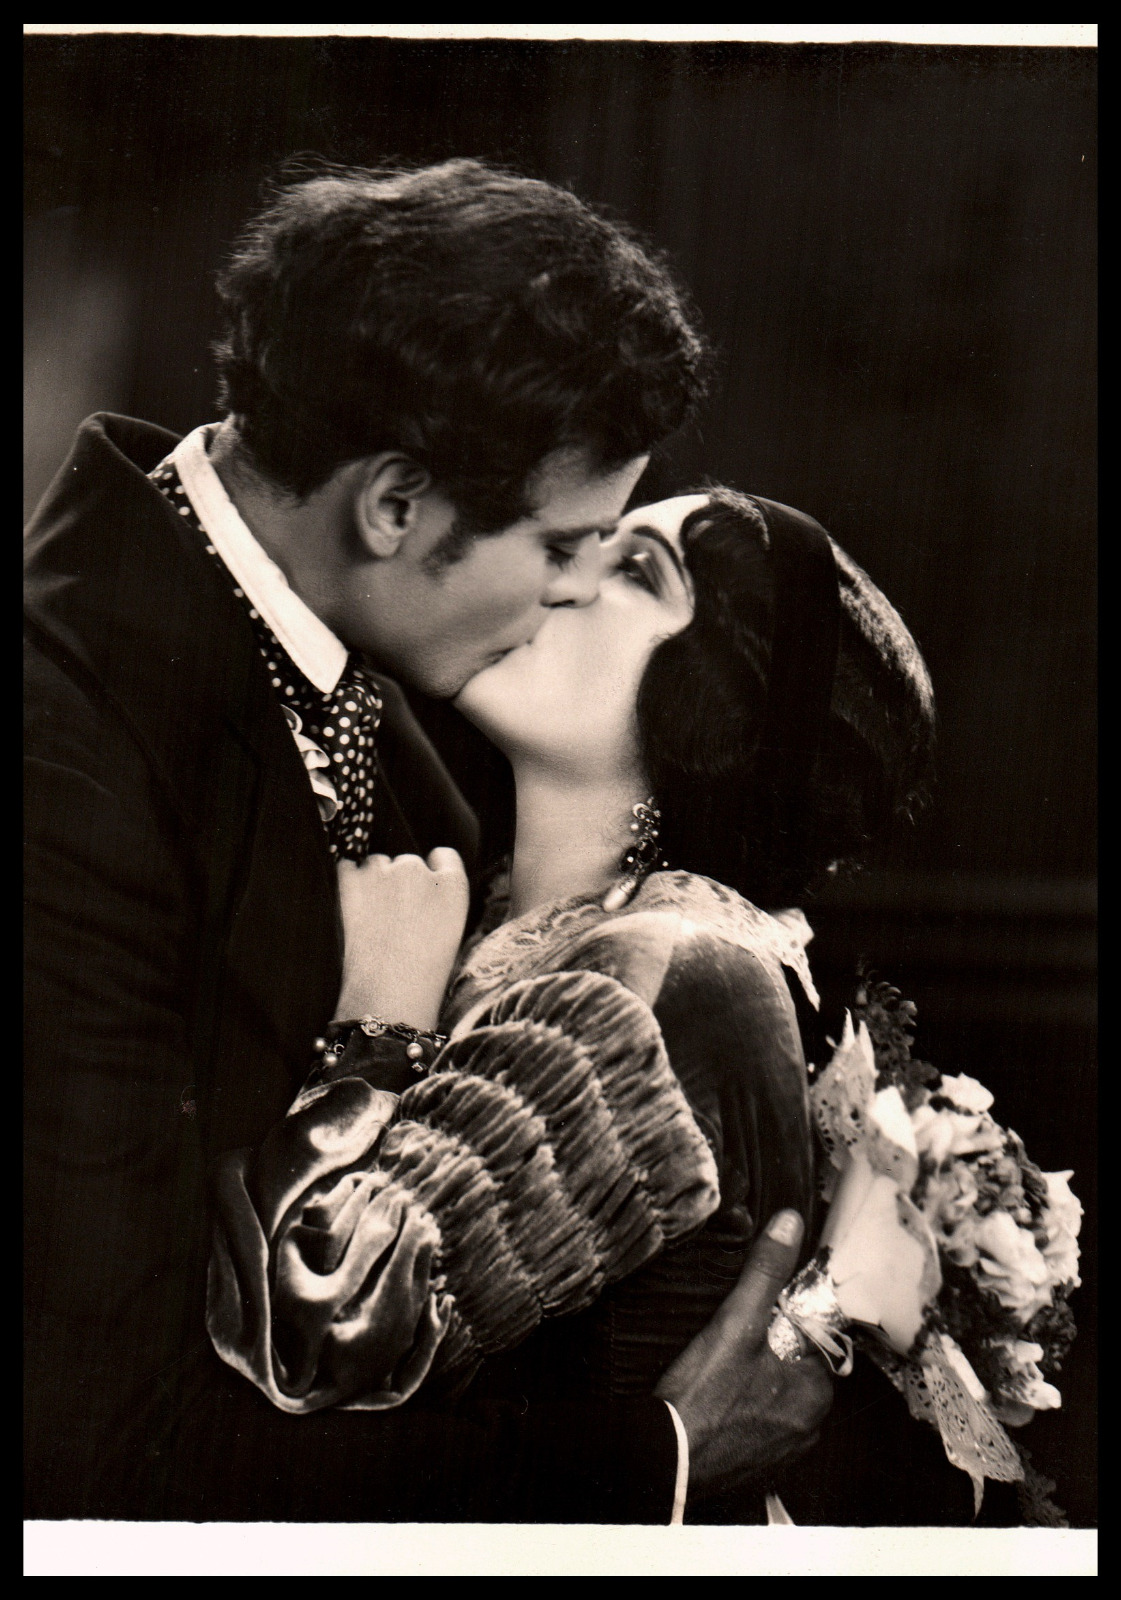 Pola Negri + Nils Asther in Loves of an Actress (1928) ❤ Silent Film Photo K 4